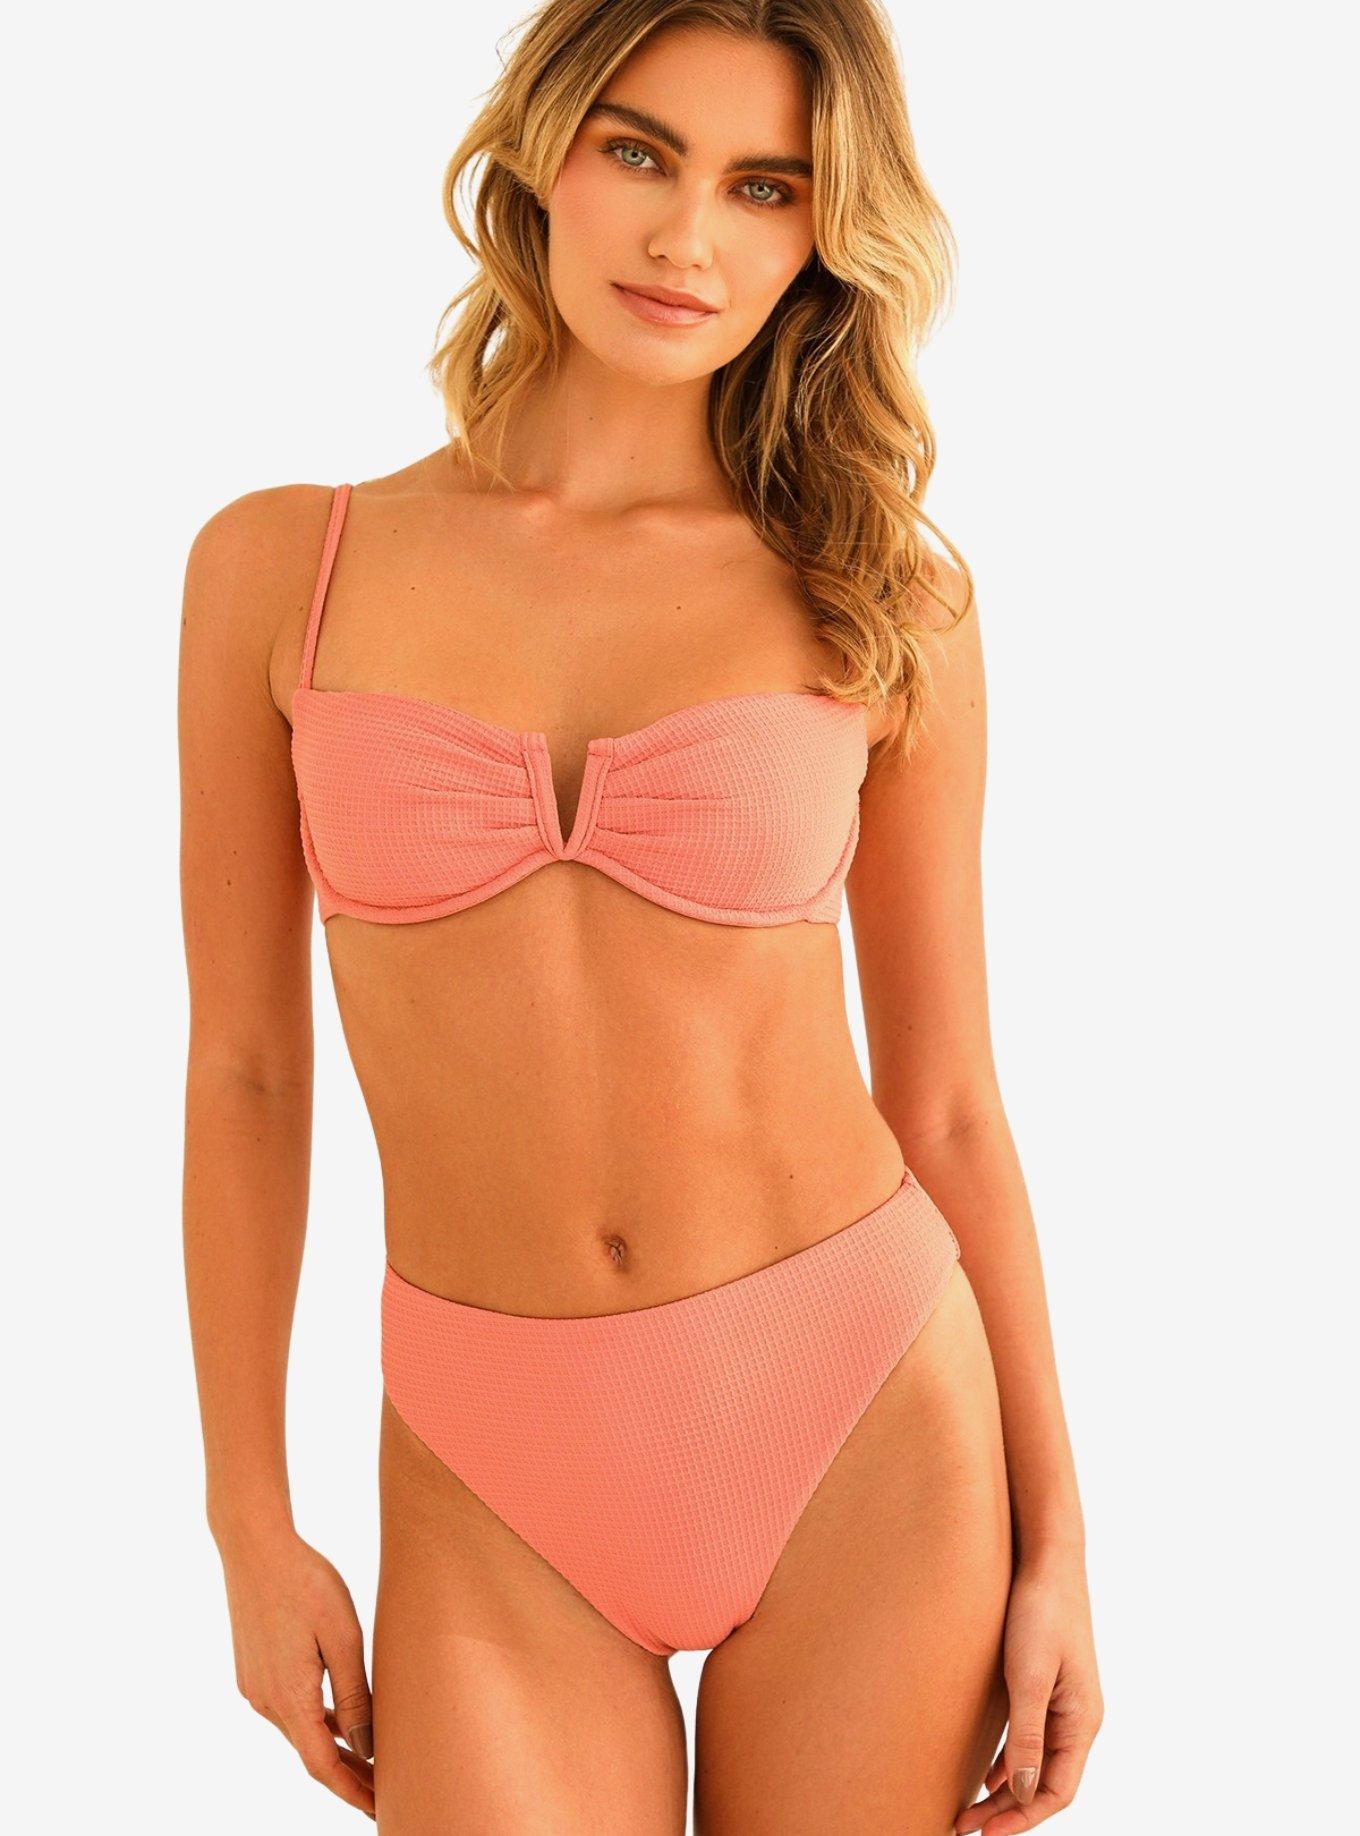 Dippin' Daisy's Diana Underwire Swim Top Tea Rose Waffle, PINK, hi-res